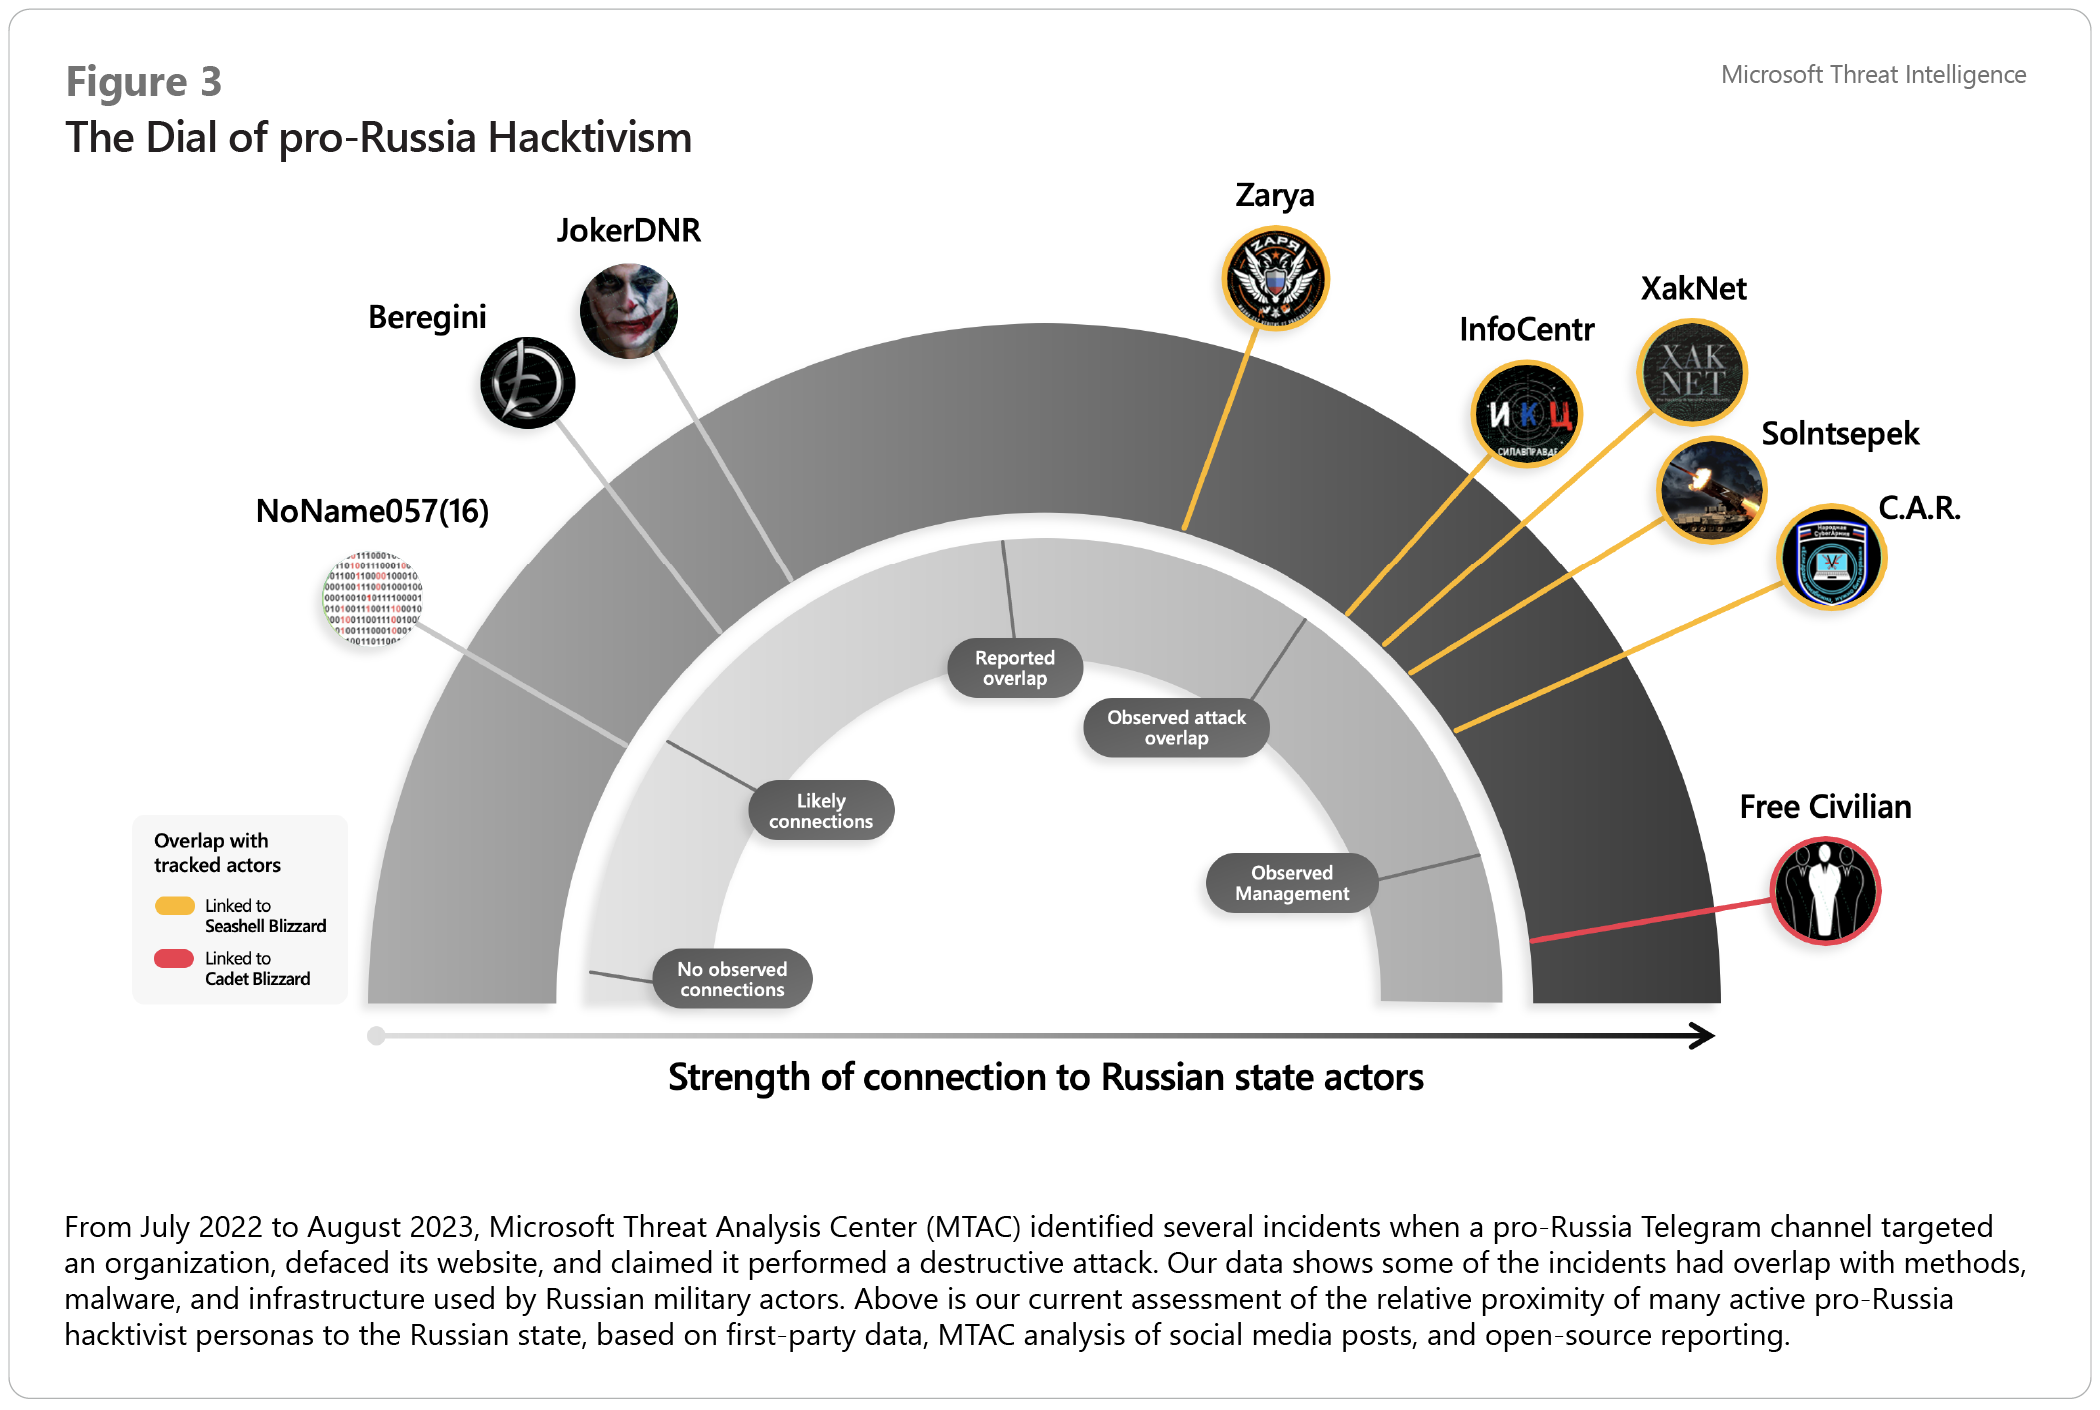 The dial of pro-Russia hacktivism